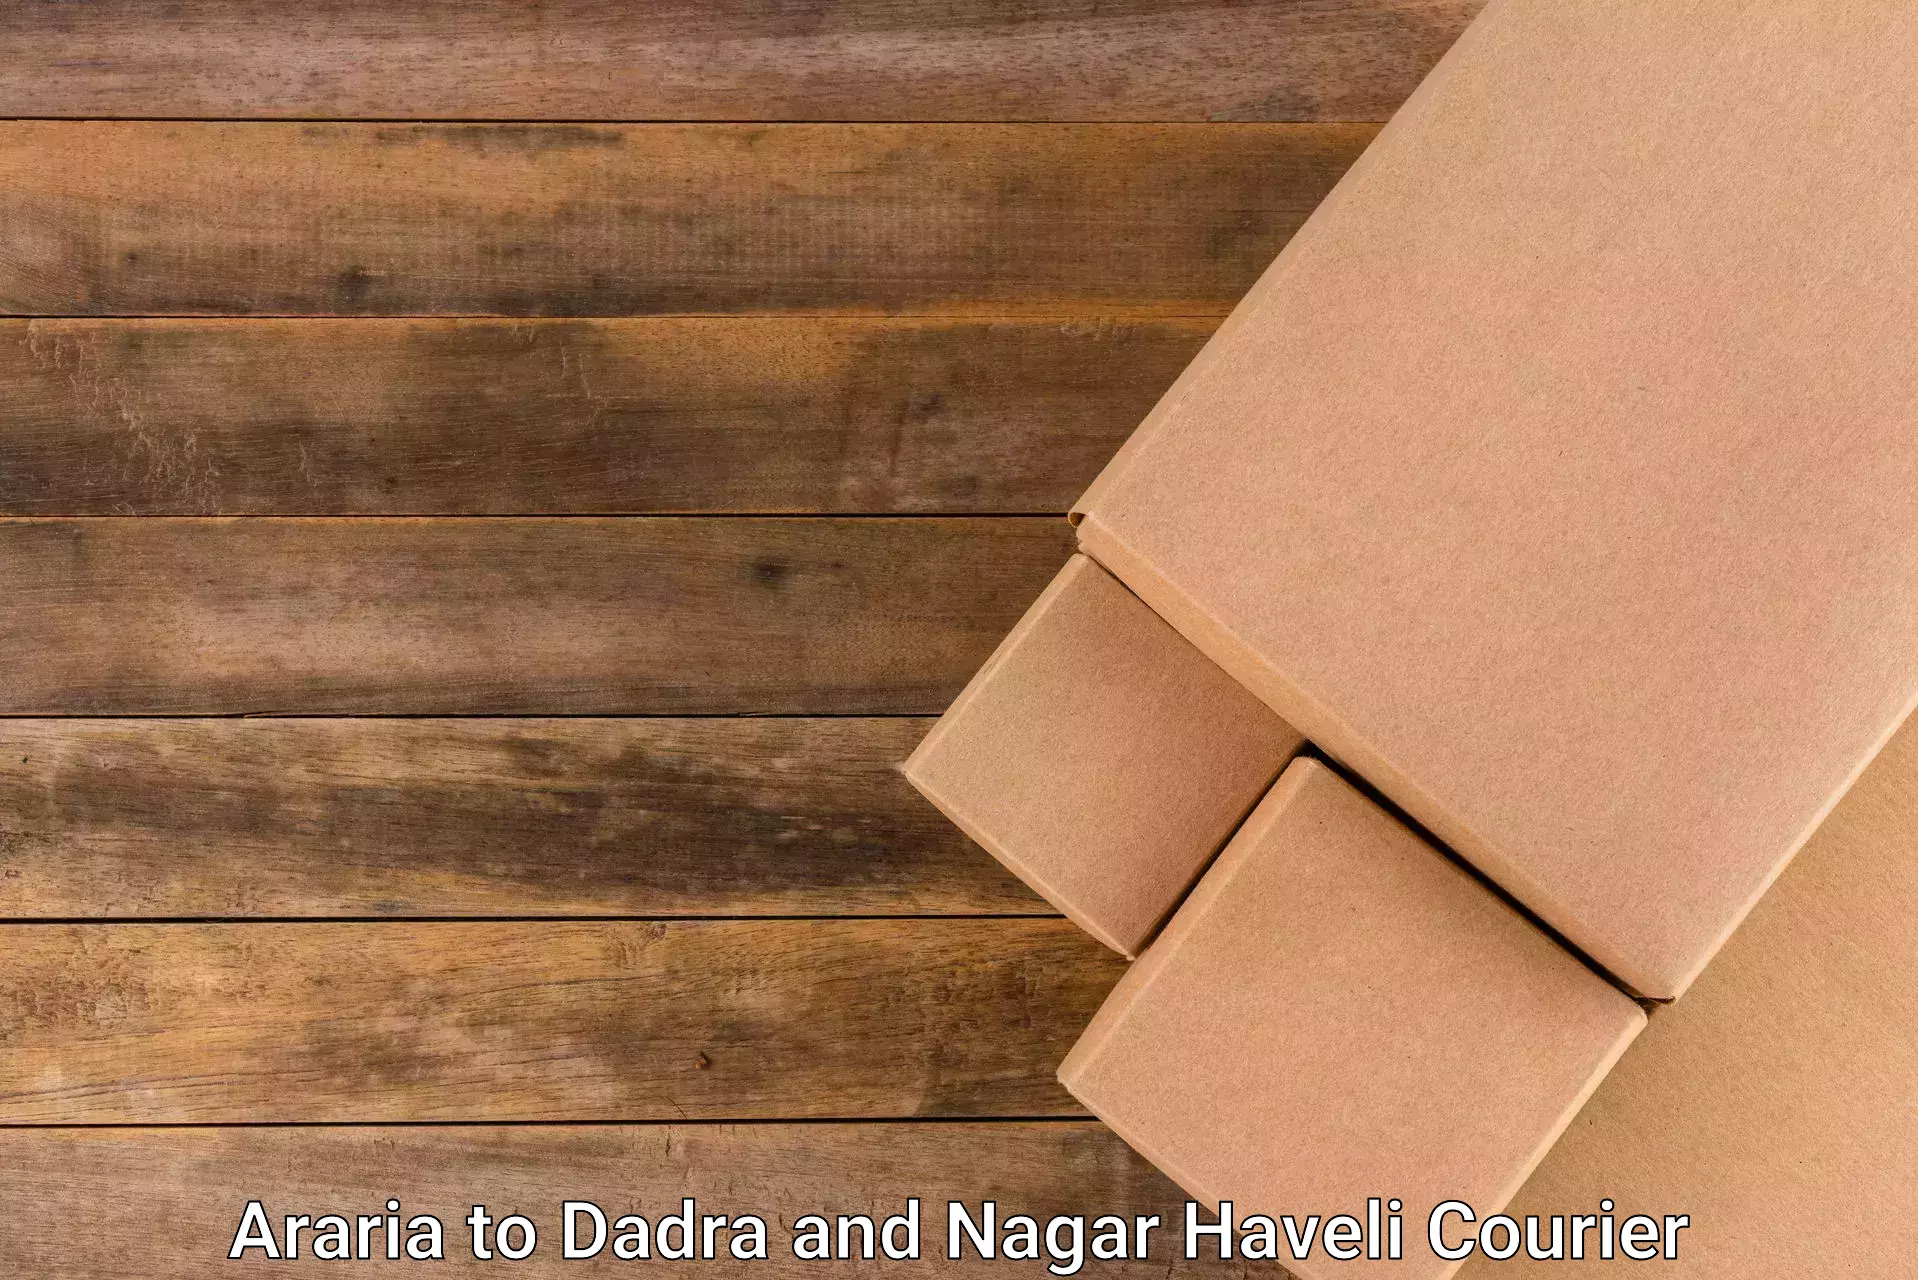 Package forwarding in Araria to Dadra and Nagar Haveli